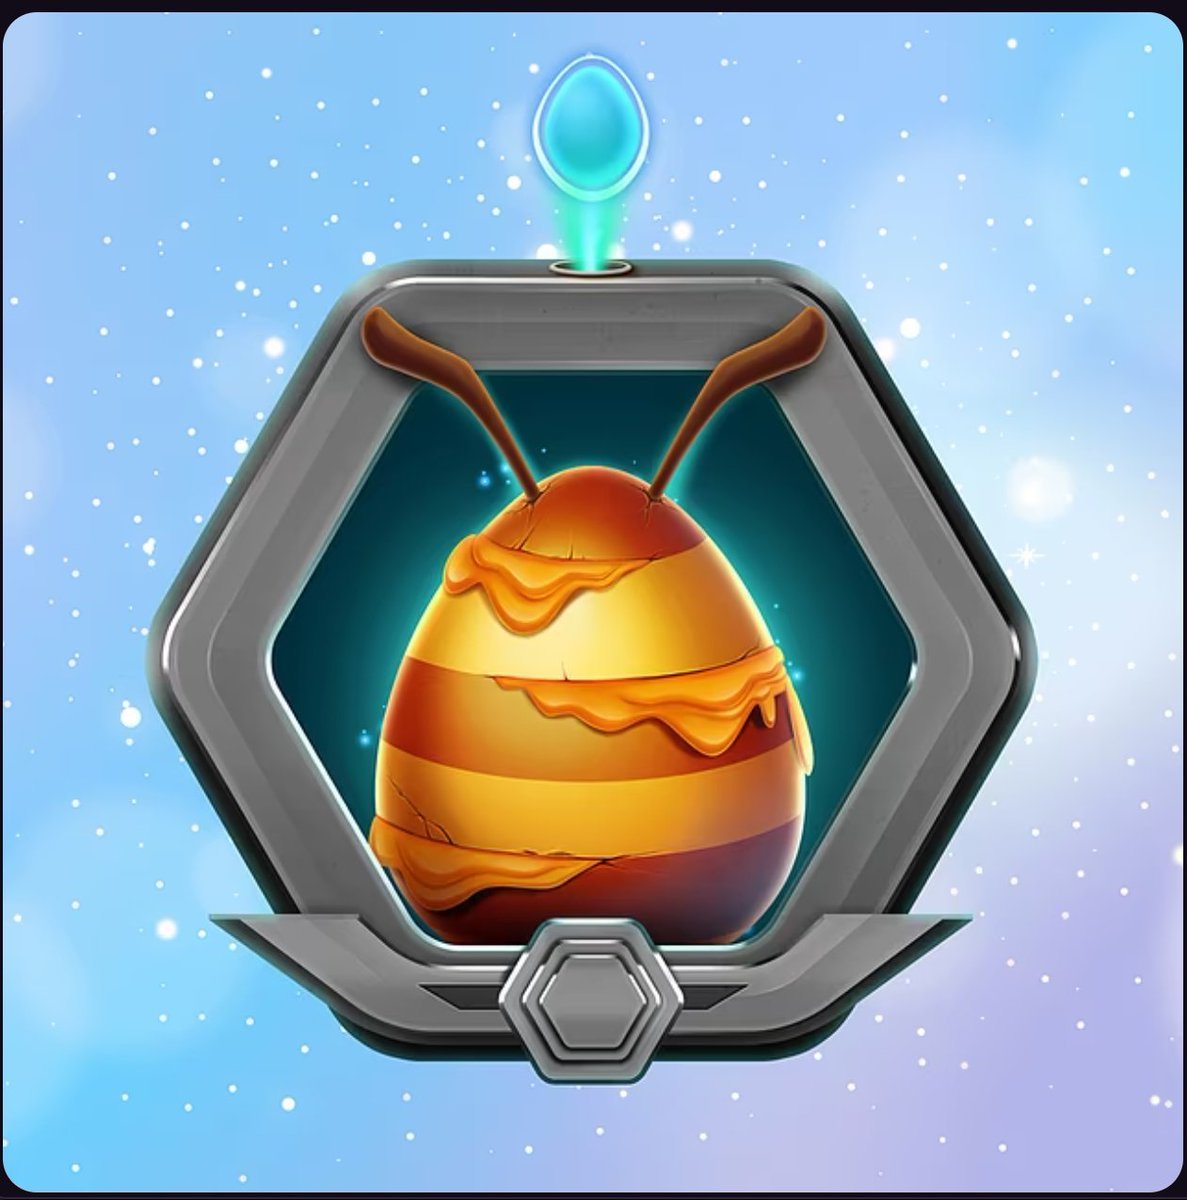 Calling all #Honeyland champions! I'm giving away a Gen 3 Egg to one lucky retweeter! That's right, you could win a brand new Gen 3 Bee! And for verified Beekeepers, there's a bonus: an Extra Bonus 50HXD Just use my code to download and become Verified, or if you're